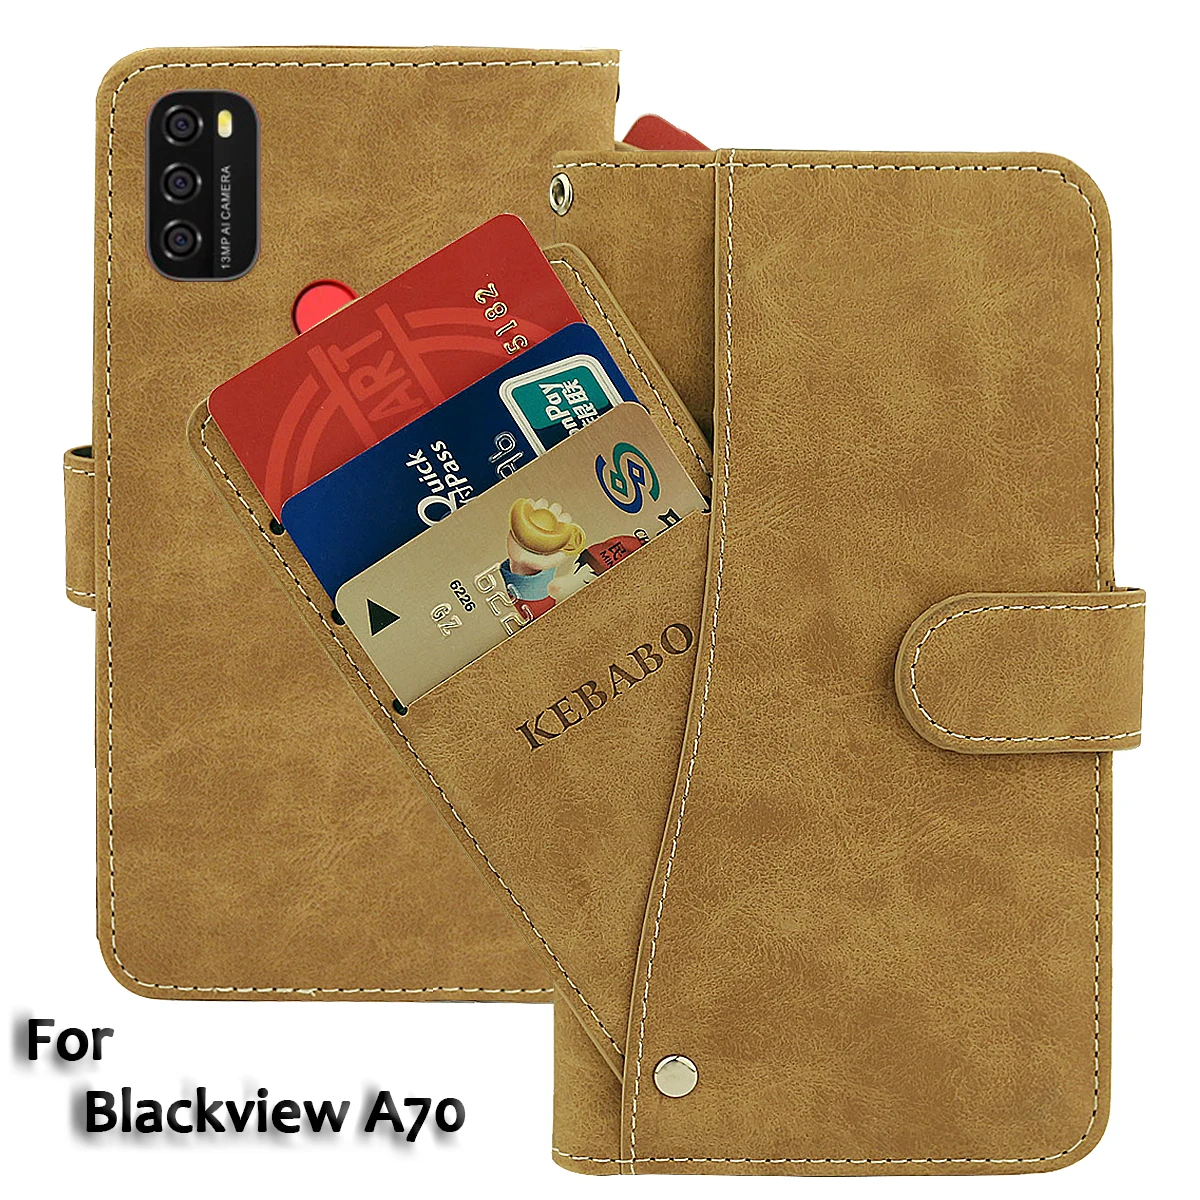 

Vintage Leather Wallet Blackview A70 Case 6.52" Flip Luxury Card Slots Cover Magnet Phone Protective Cases Bags